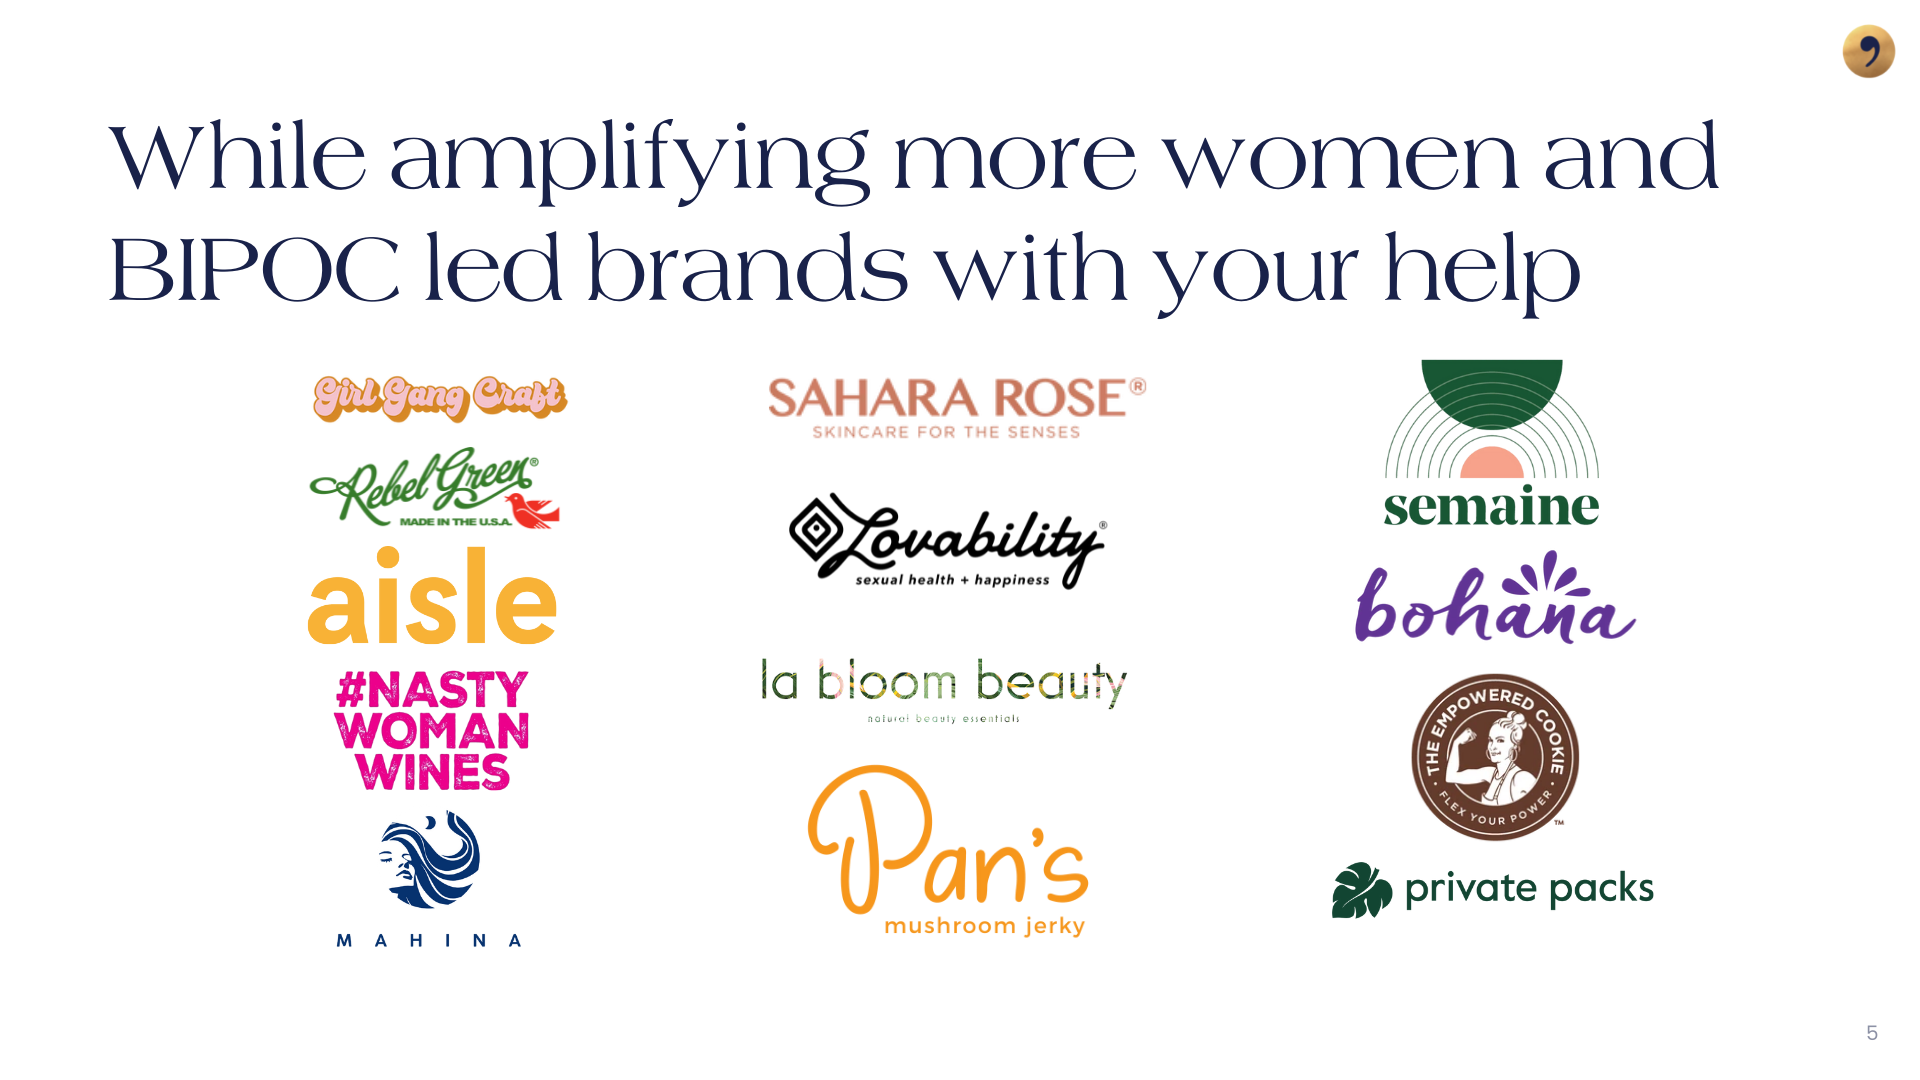 My Comma has worked with over 100 brands, many of them have been women and/or BIPOC-led and have a give back component.